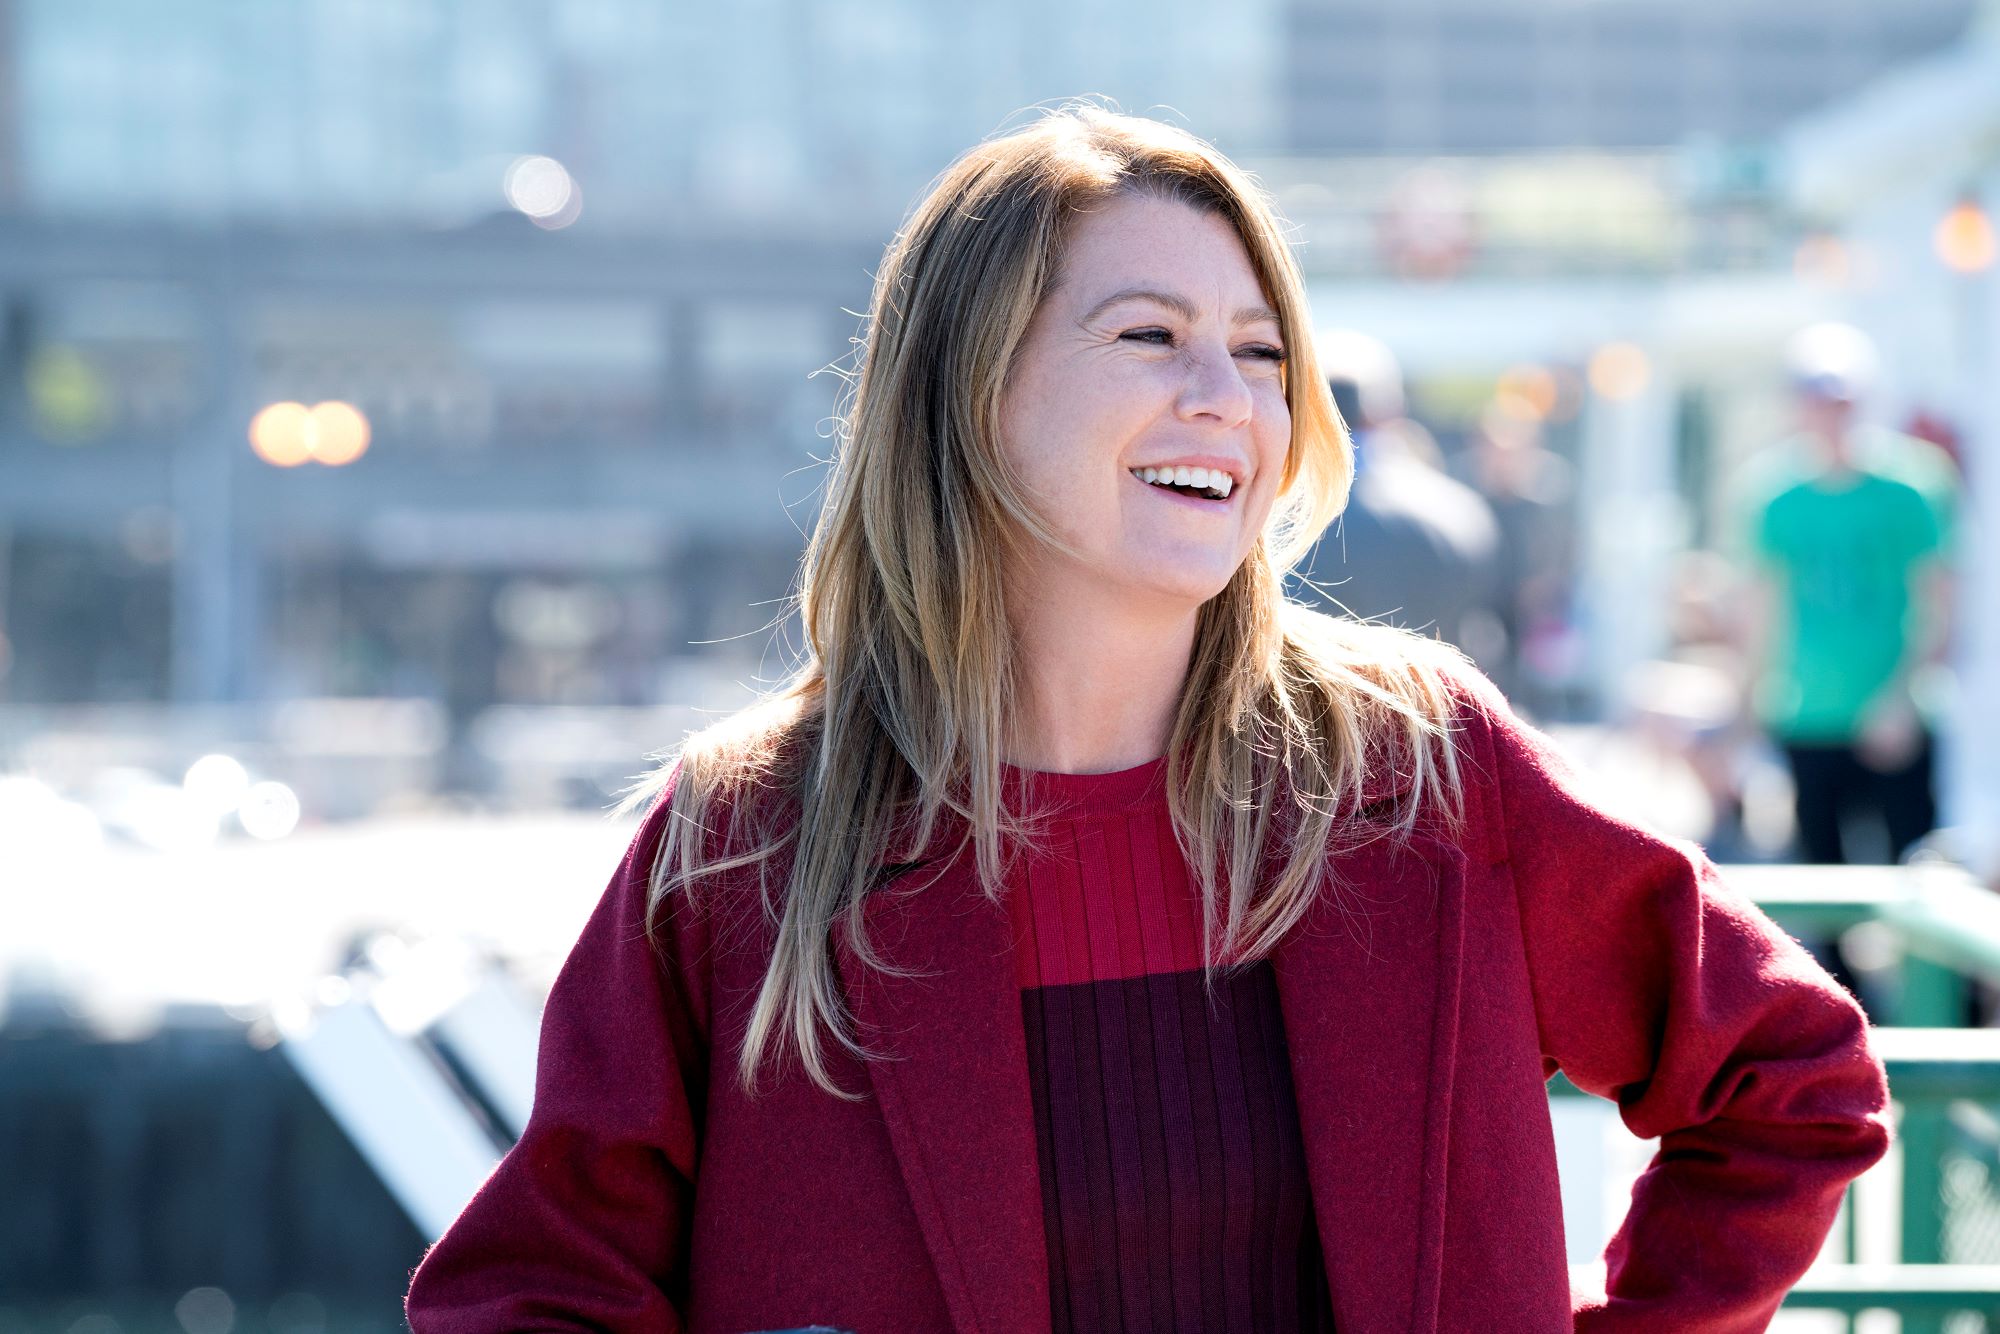 Meredith from 'Grey's Anatomy' dressed in a red coat and black shirt.